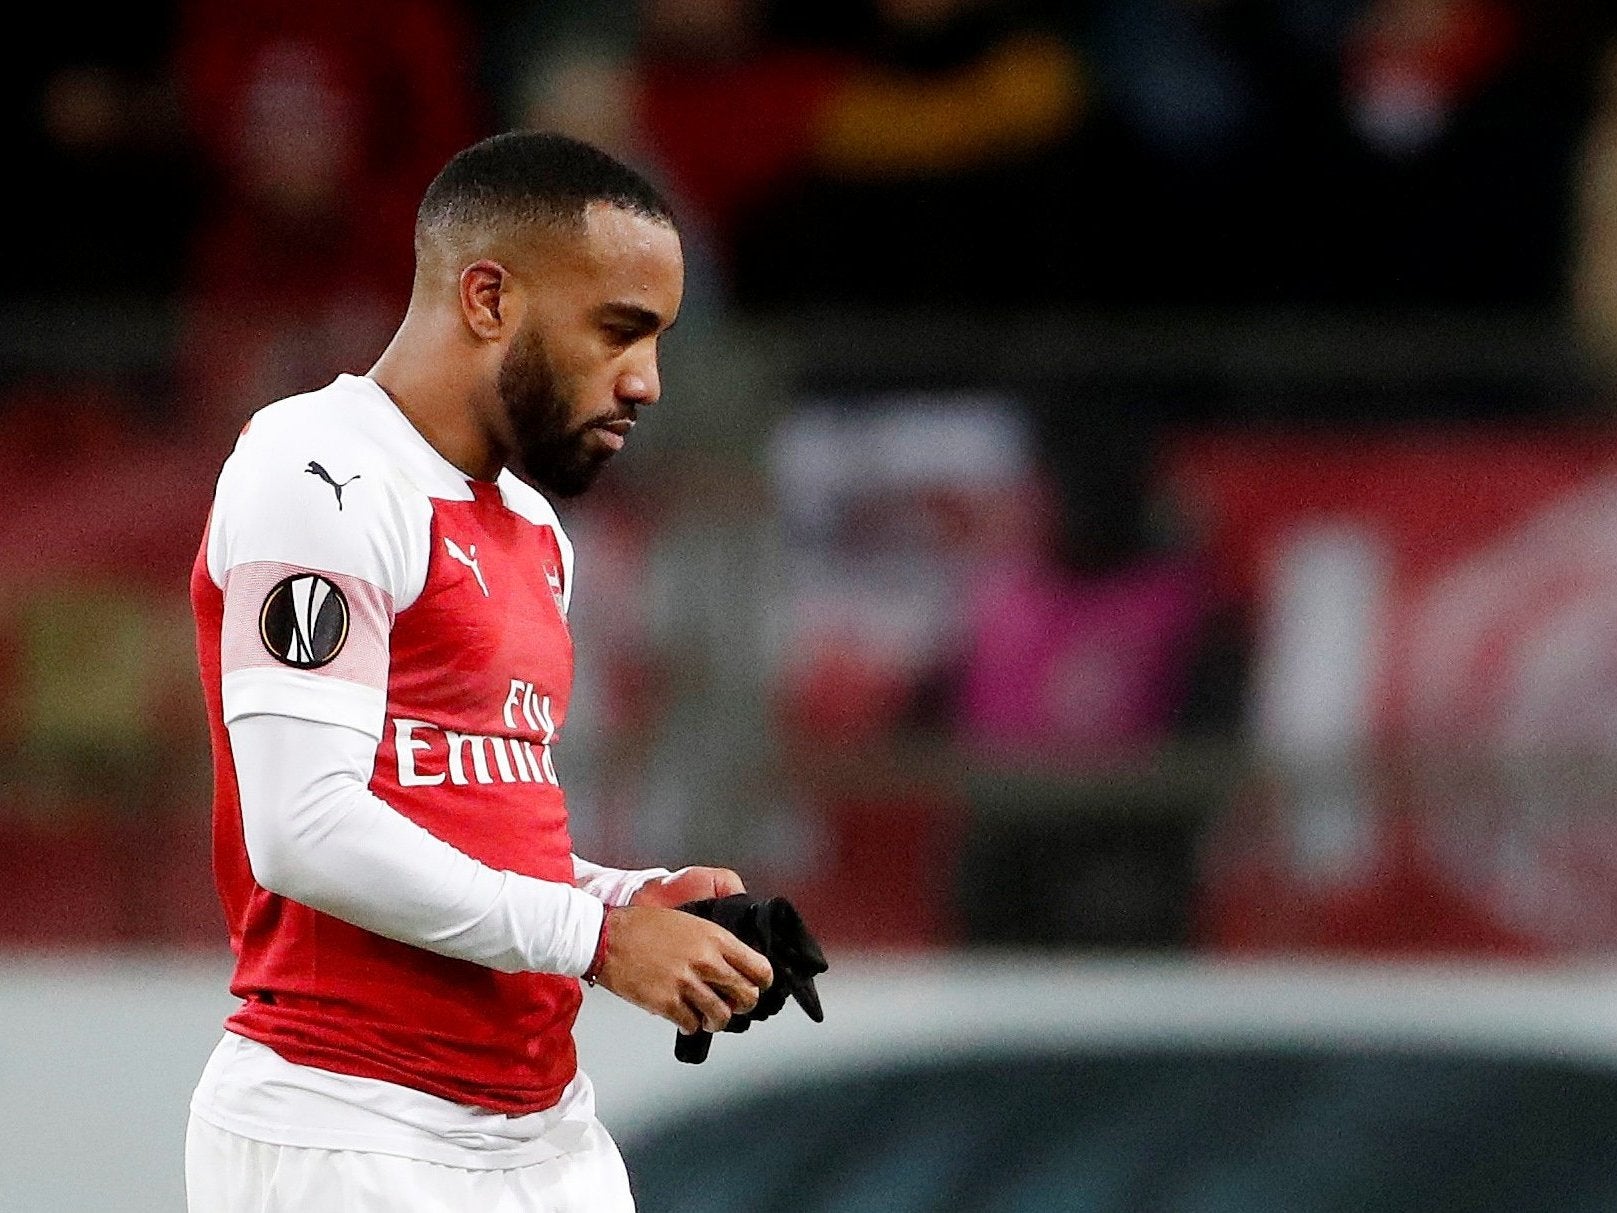 Alexandre Lacazette was sent off for a wild swing of the elbow